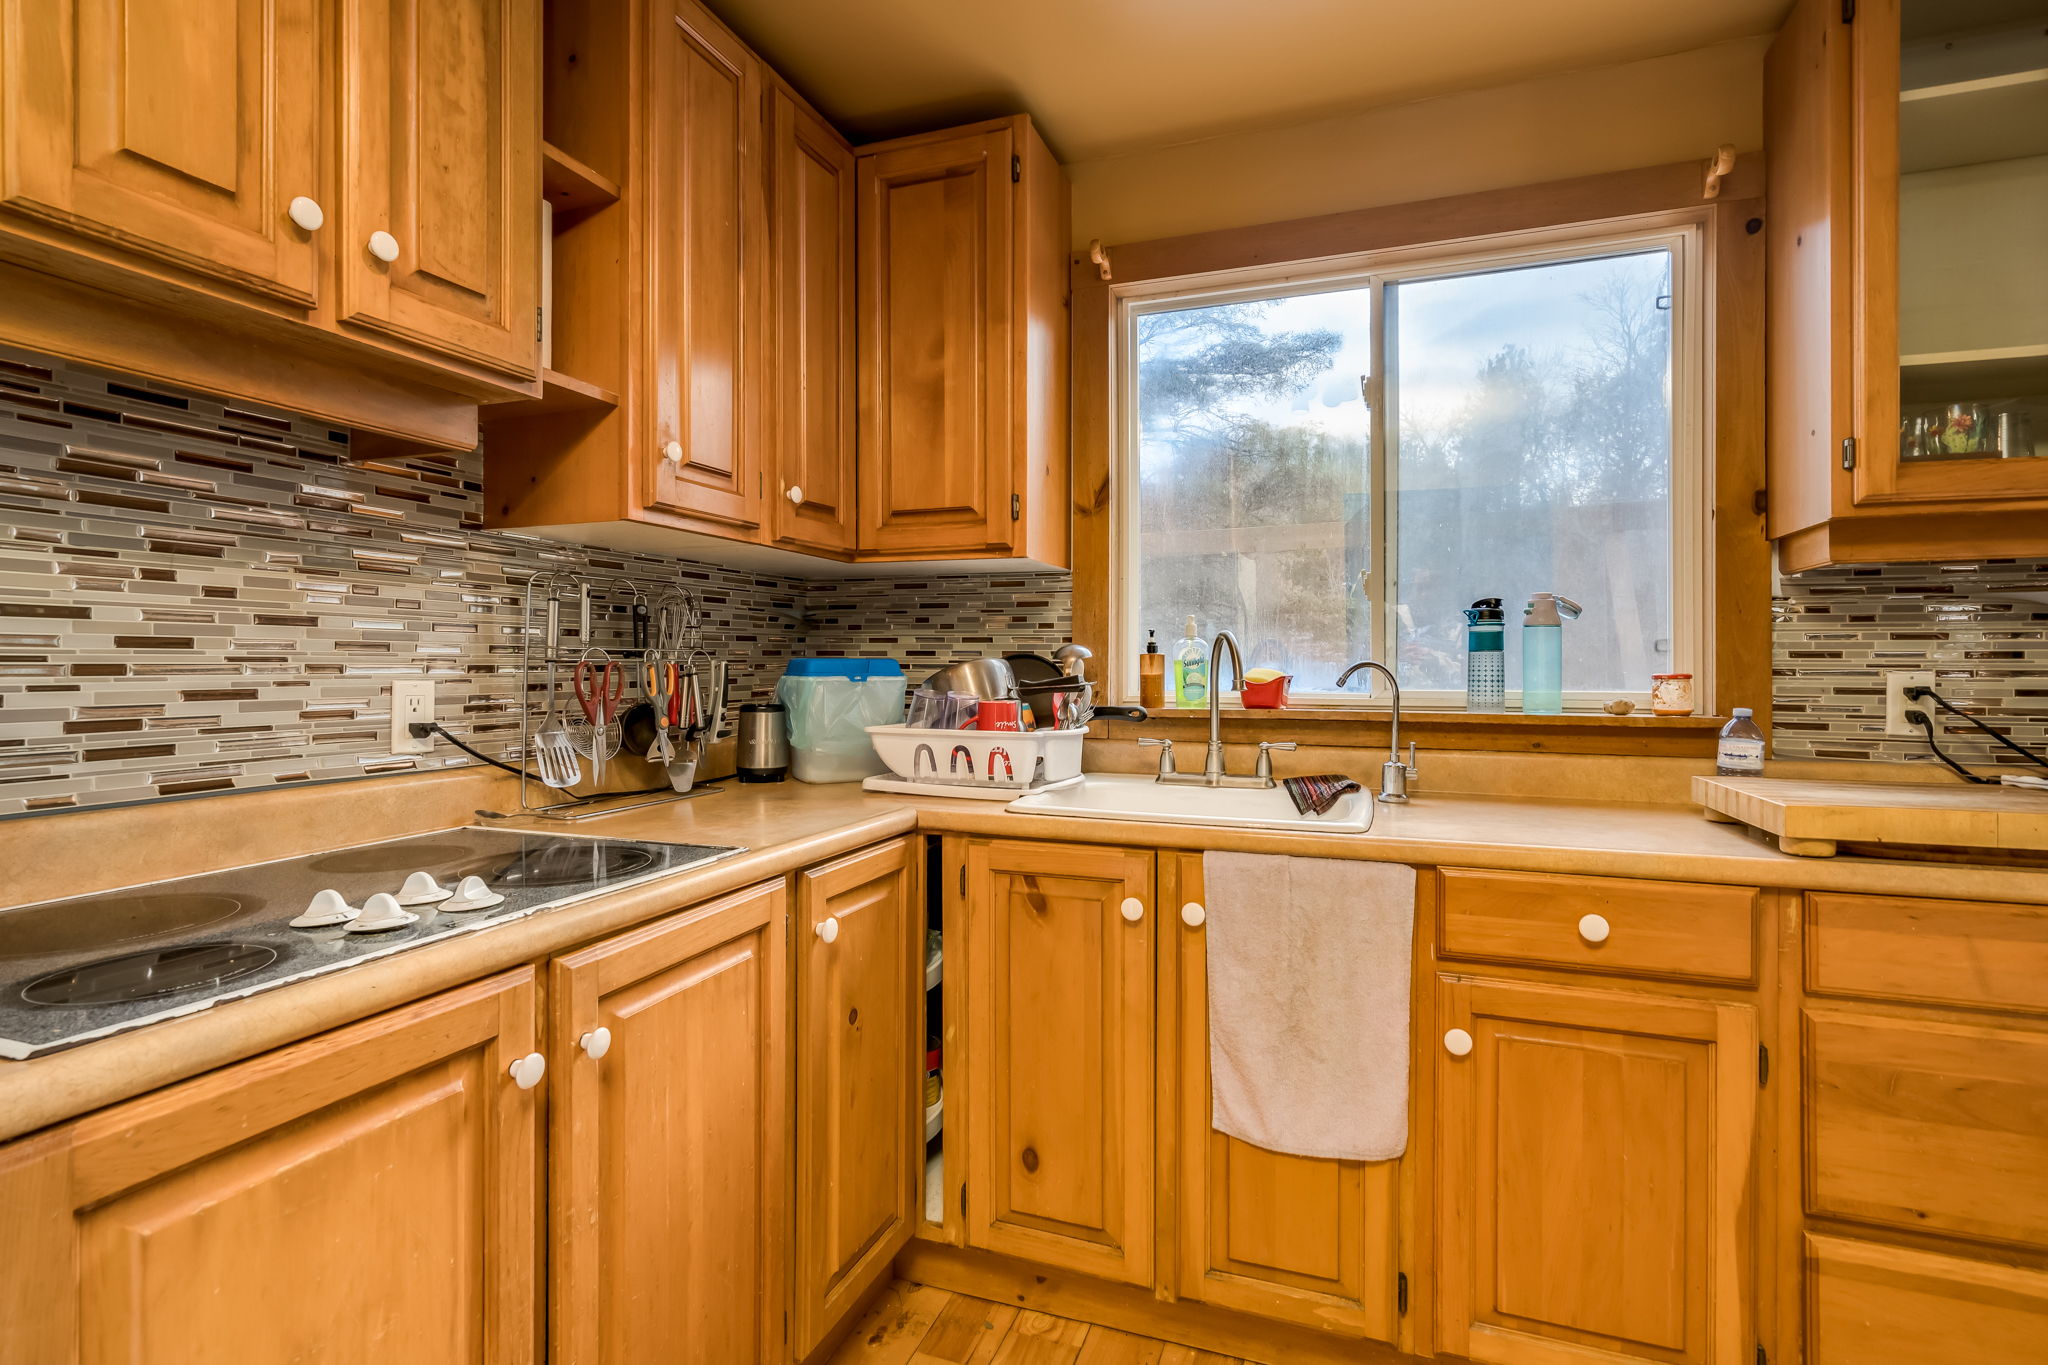  16865 12th Concession, King, ON L0G 1T0, US Photo 17